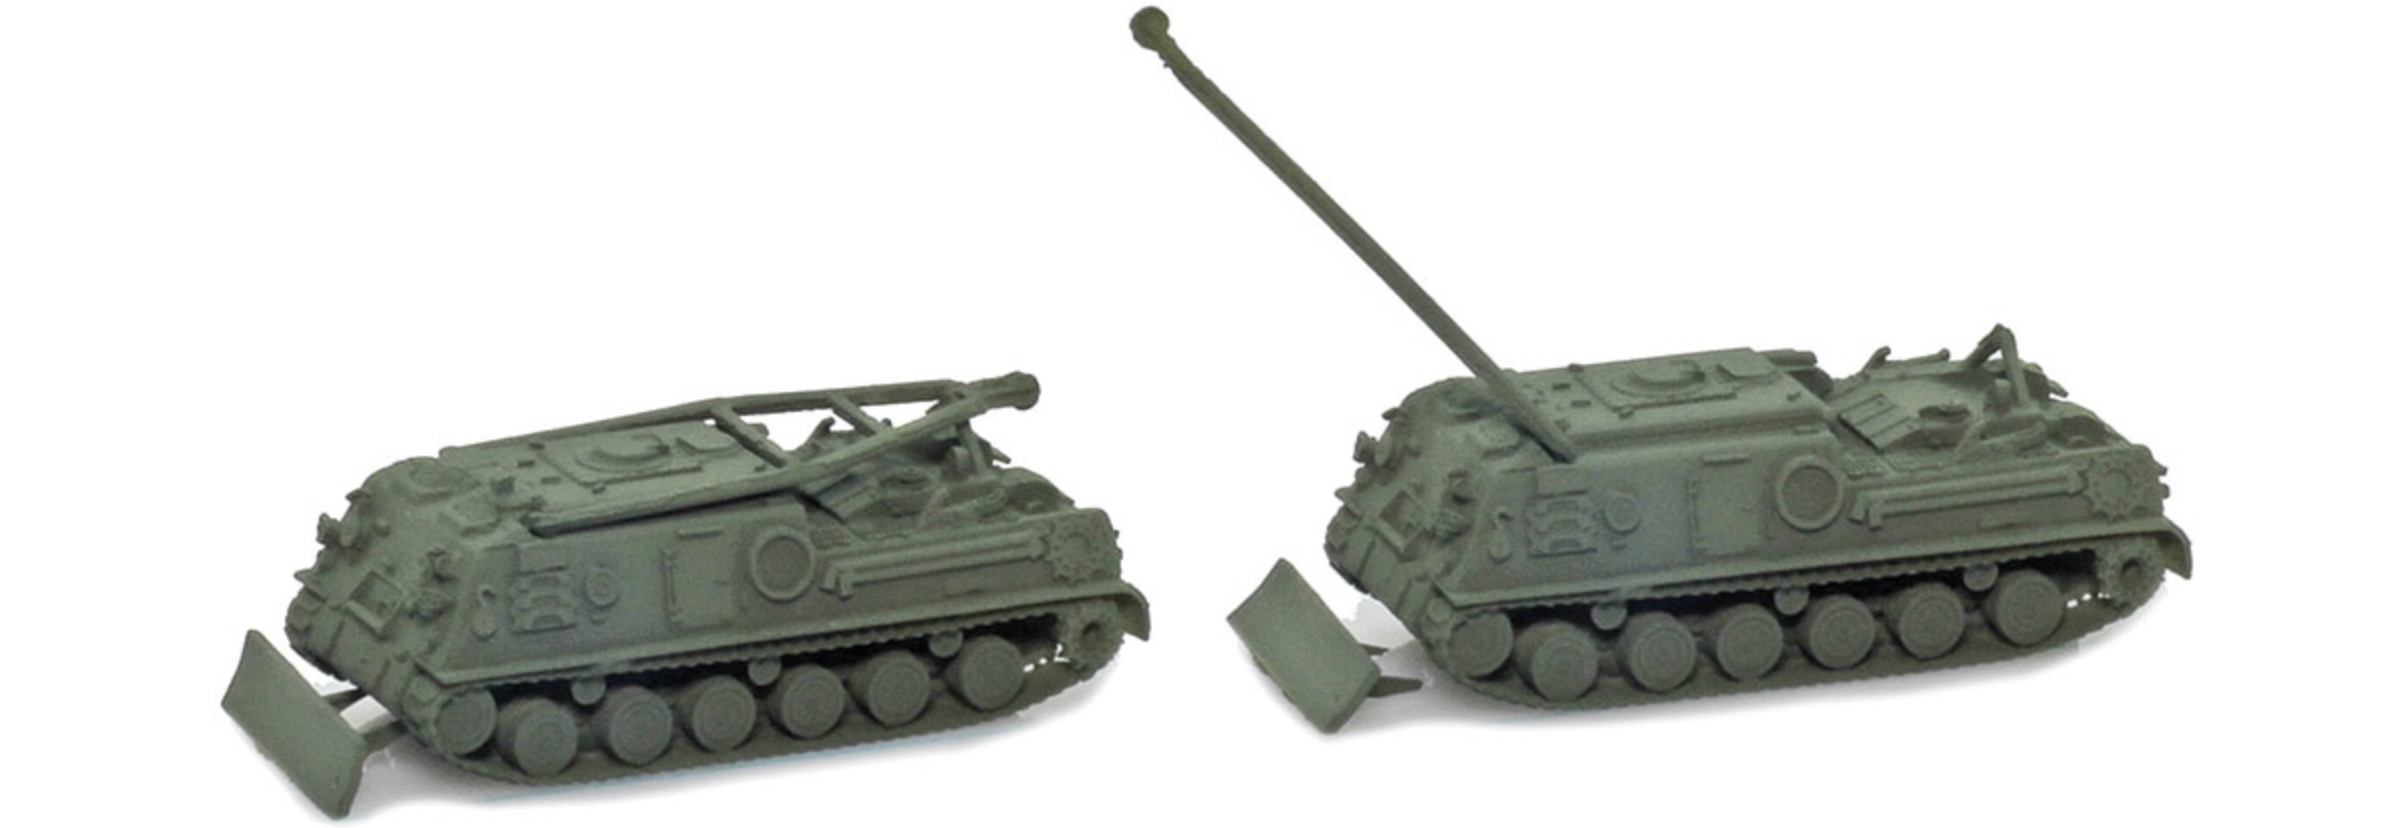 Z Scale - AZL - AZLM88-G - Armored Vehicles, M88 Recovery Vehicle - United States Army - 2-Pack